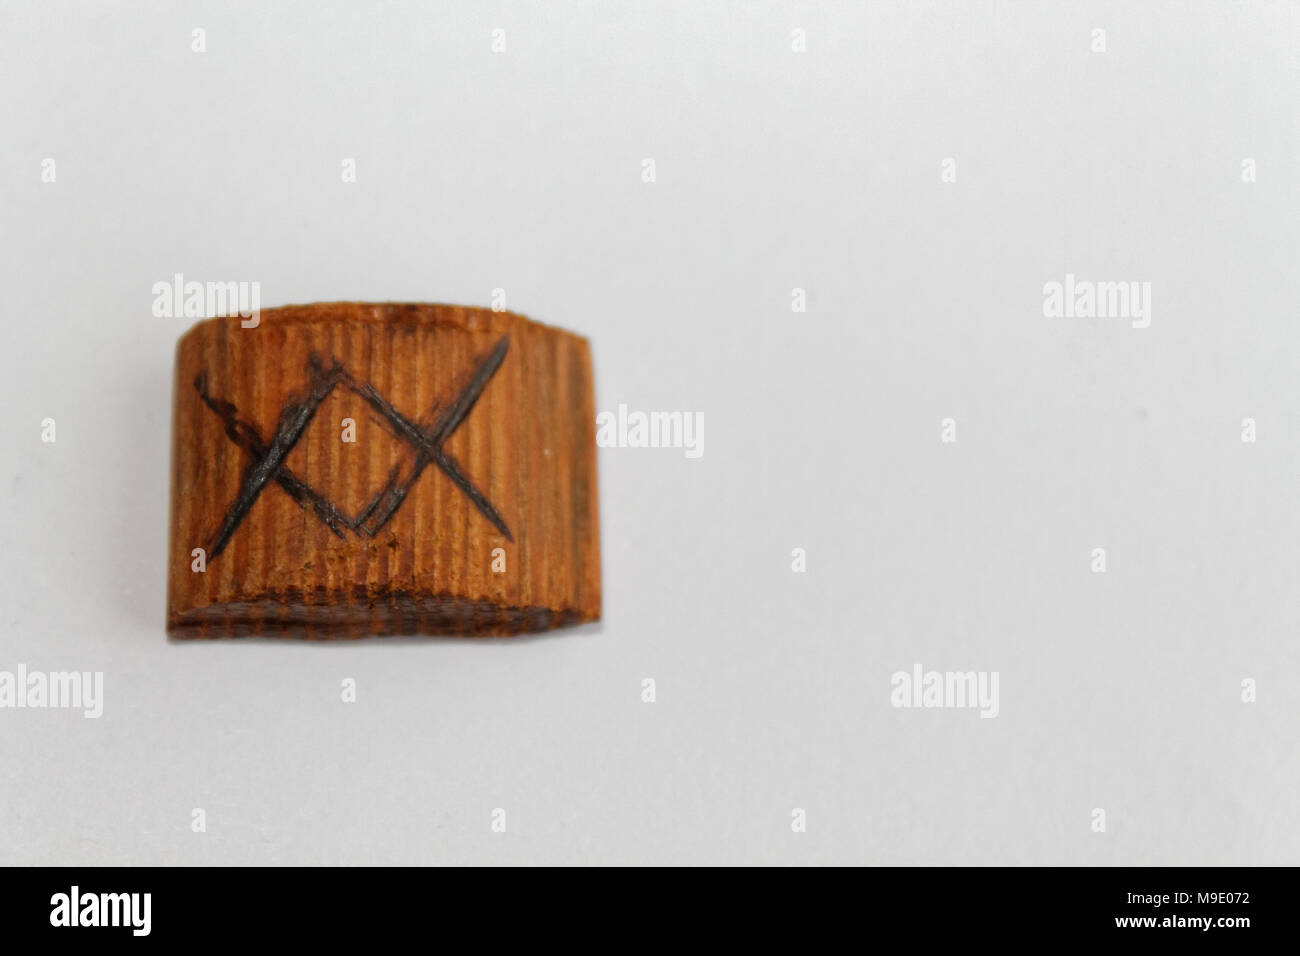 Wooden rune which means a gift, lie on a table on a white background Stock Photo